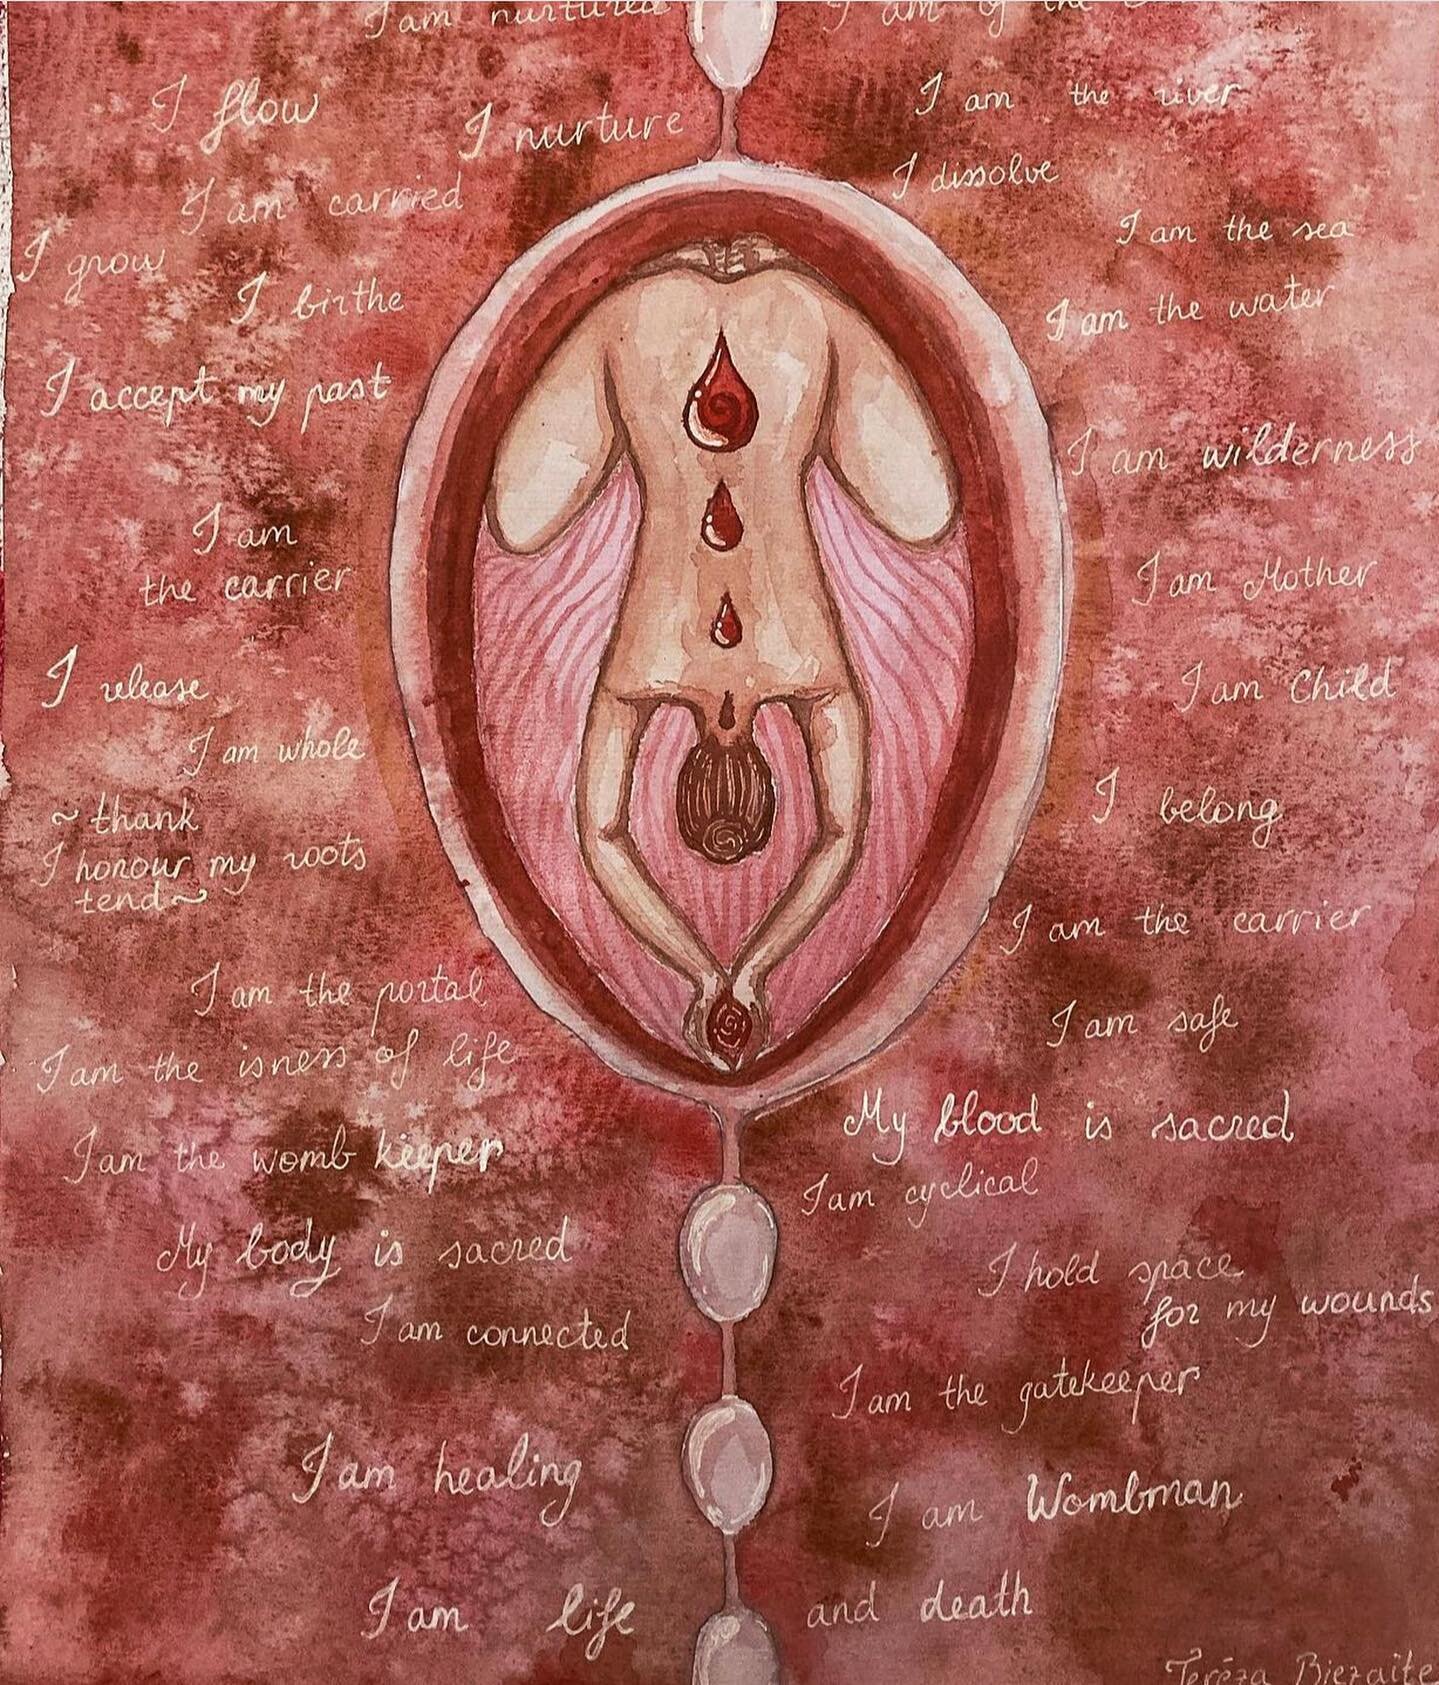 What if we taught our daughters &amp; our sons the sacredness of the feminine mysteries 🩸

~ The importance of rites of passage.
~ The sacredness &amp; healing powers of our blood.
~ The phases, cycles and season we move through each moon.
~ The psy